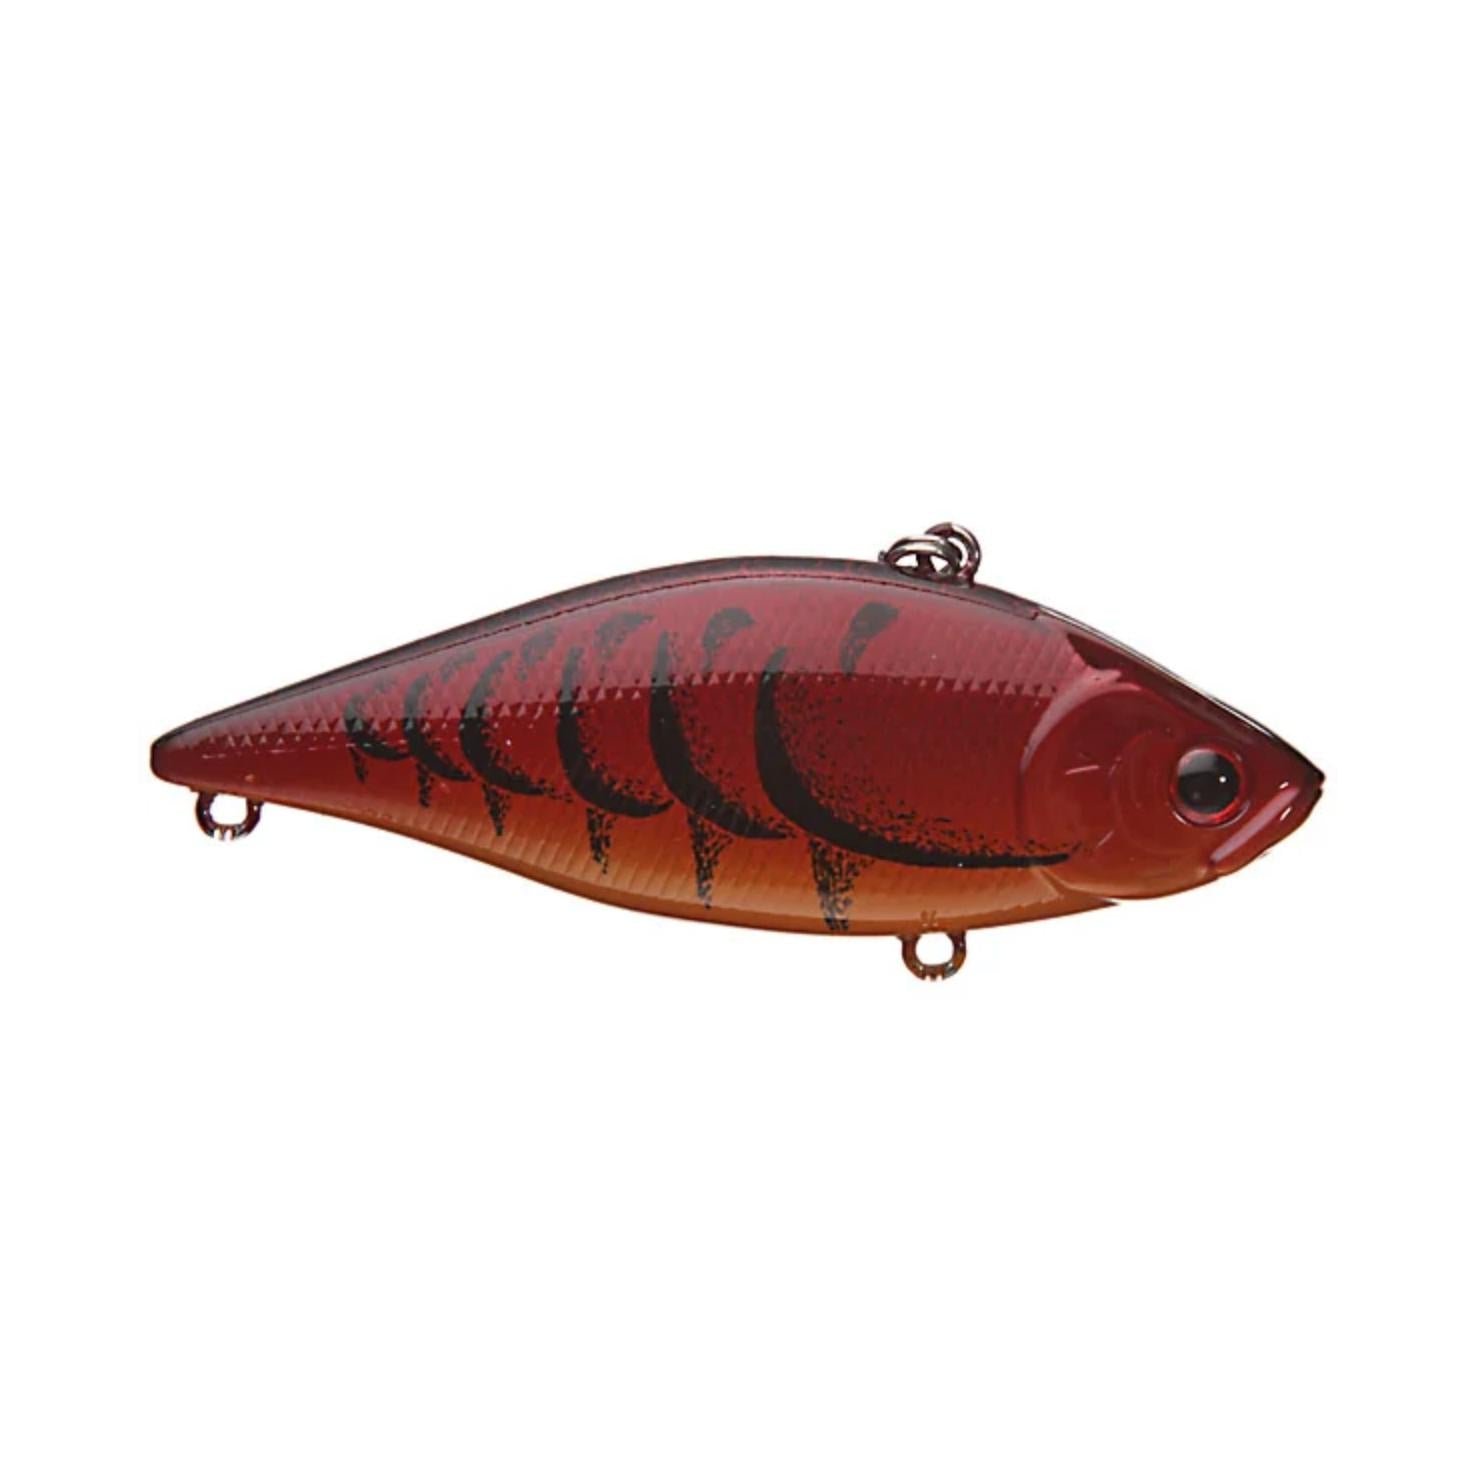 Lucky Craft Fishing Lure LV-500 Crank Bait, Ghost